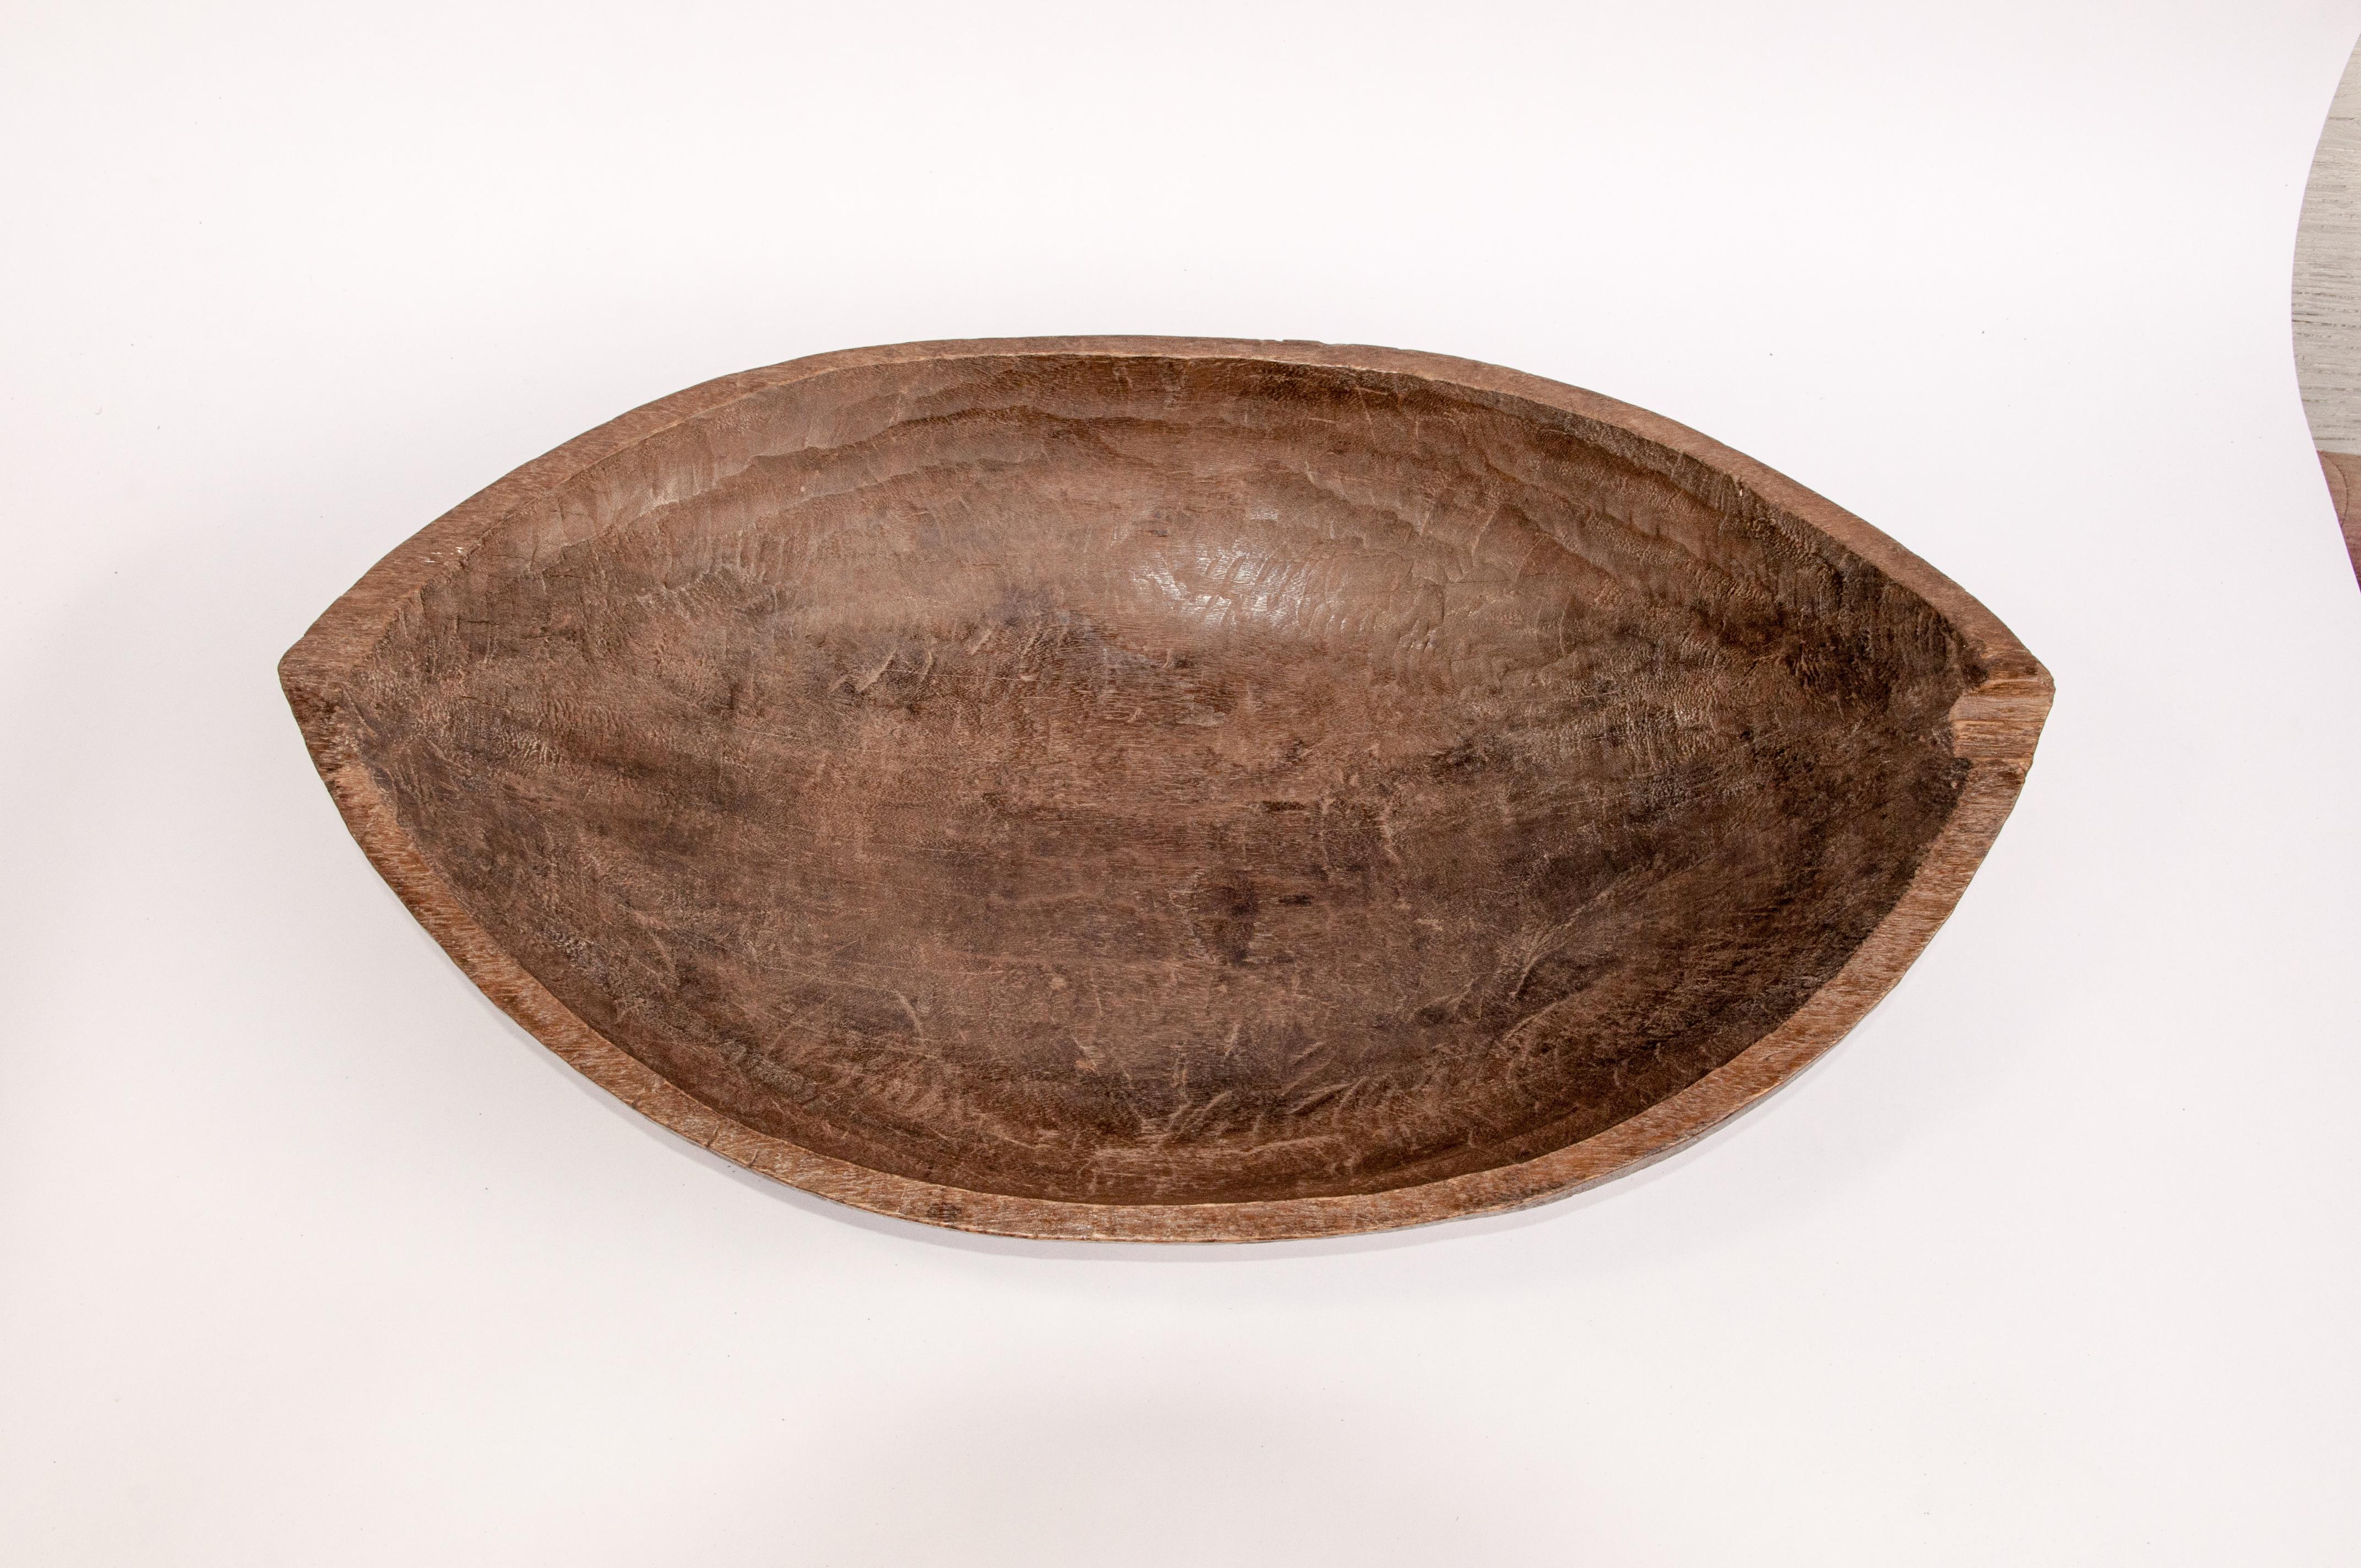 Tribal Hand Hewn Wooden Tray, Bowl, Mentawai Islands, Early to Mid-20th Century 6